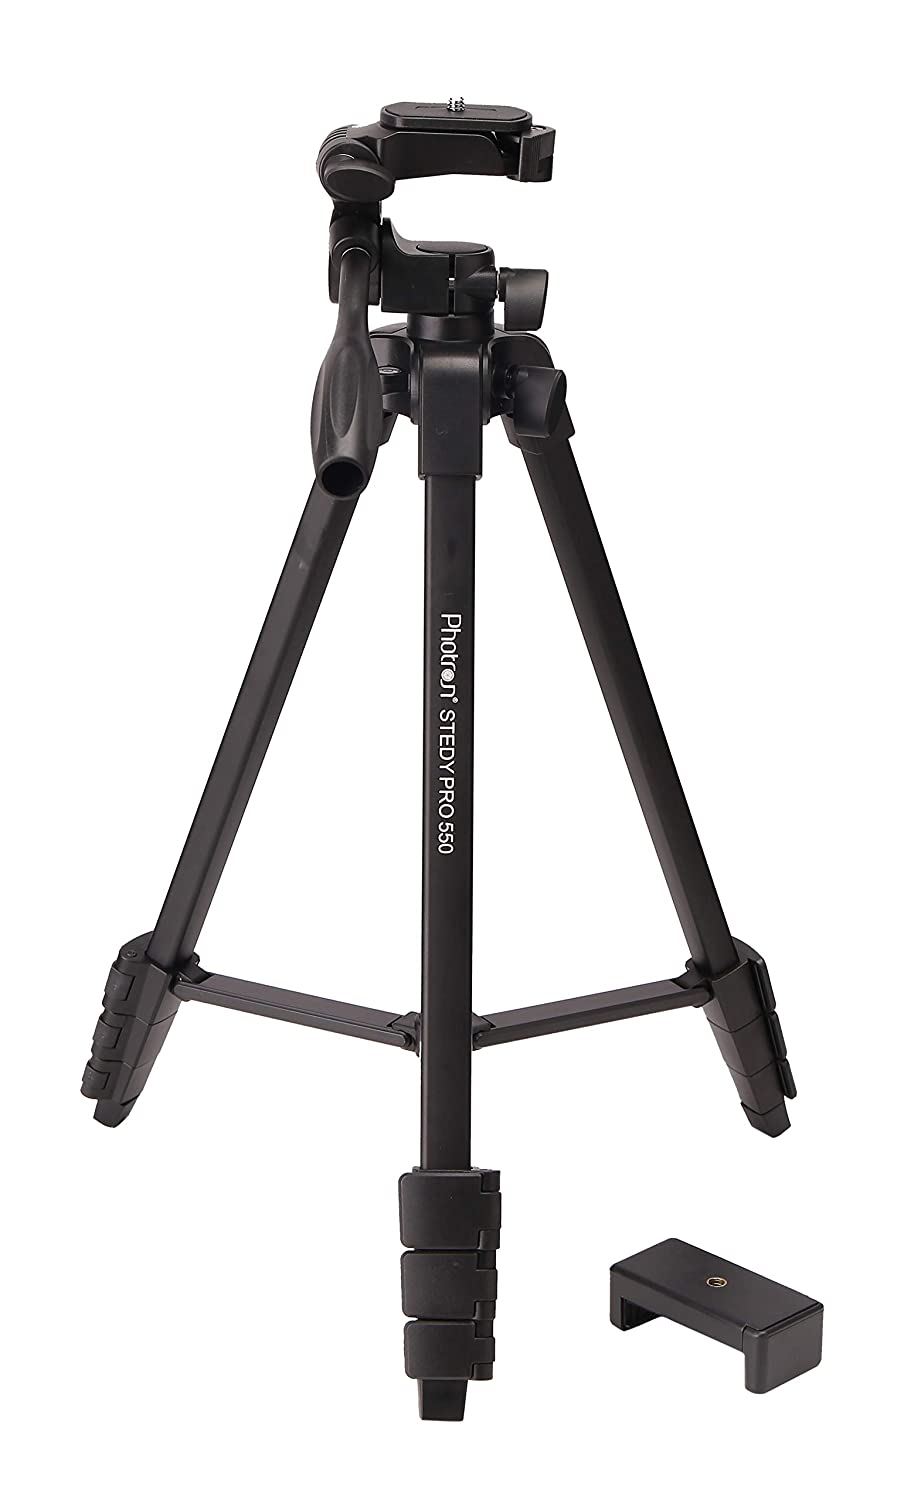 Photron stedy PRO 550 Tripod with Mobile Holder for Smart Phone, DSLR, Mobile Phone - The Camerashop